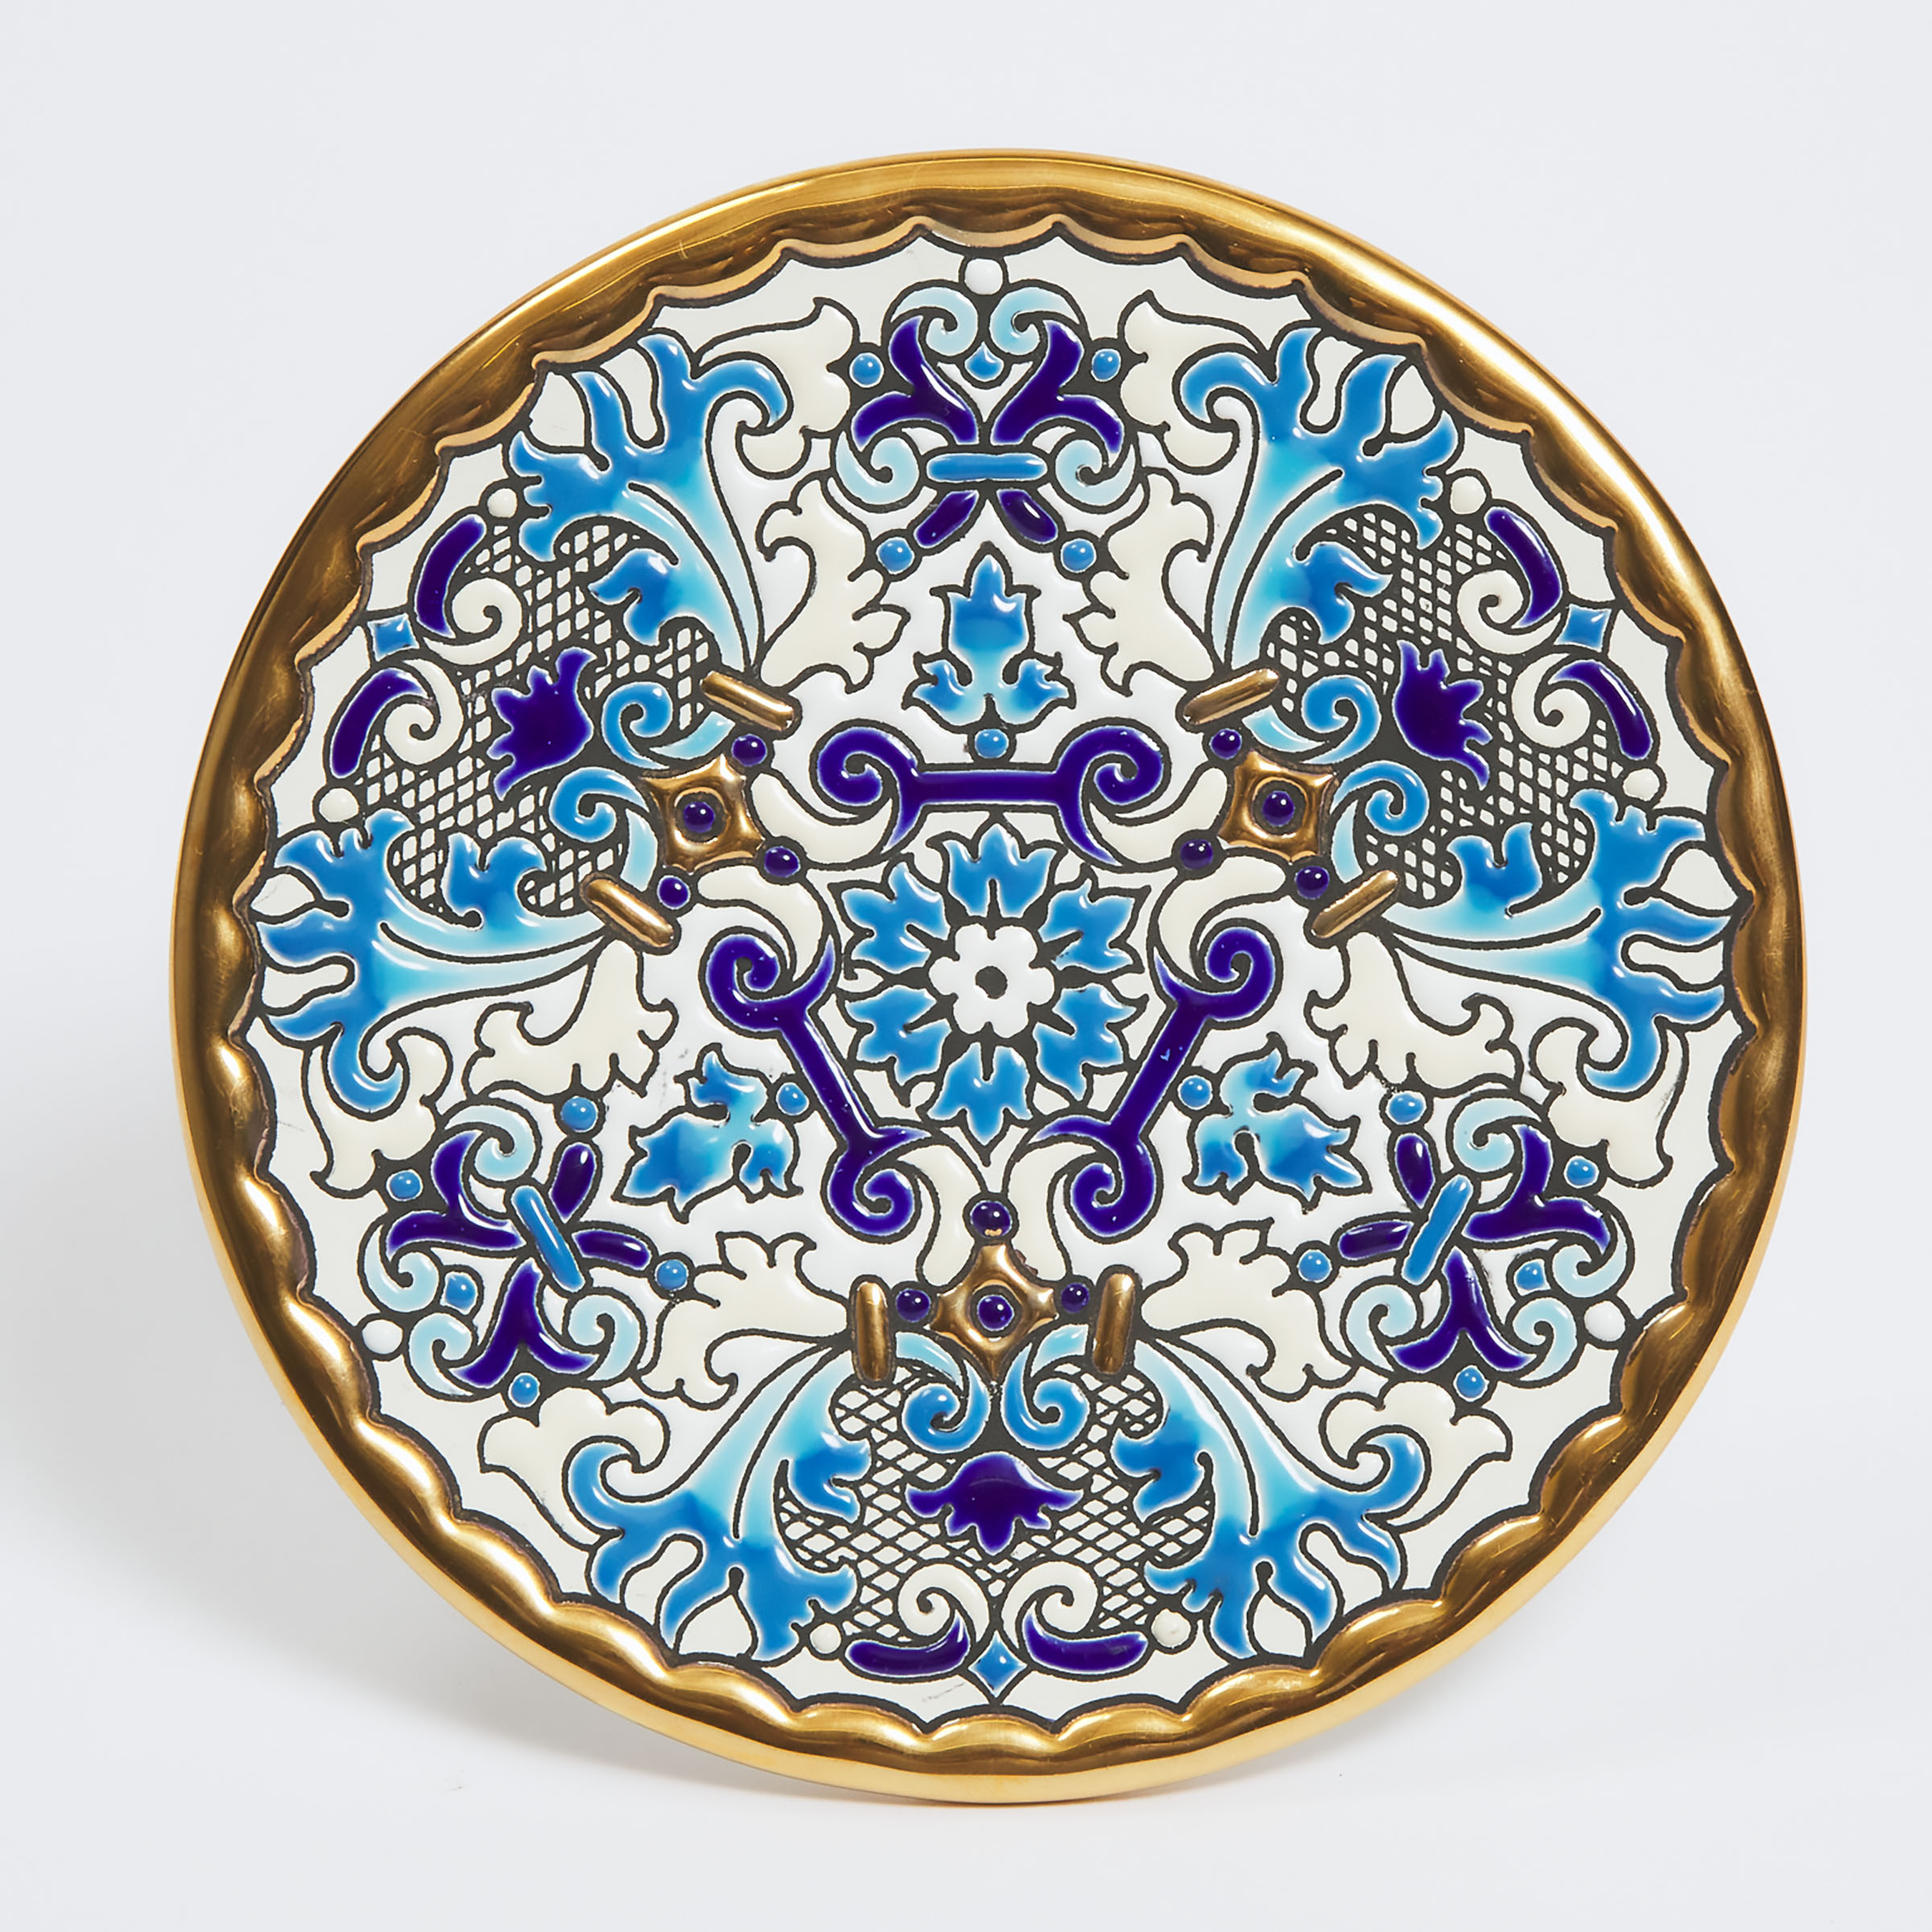 Cearco Enameled and Gilt Pottery Wall Plate